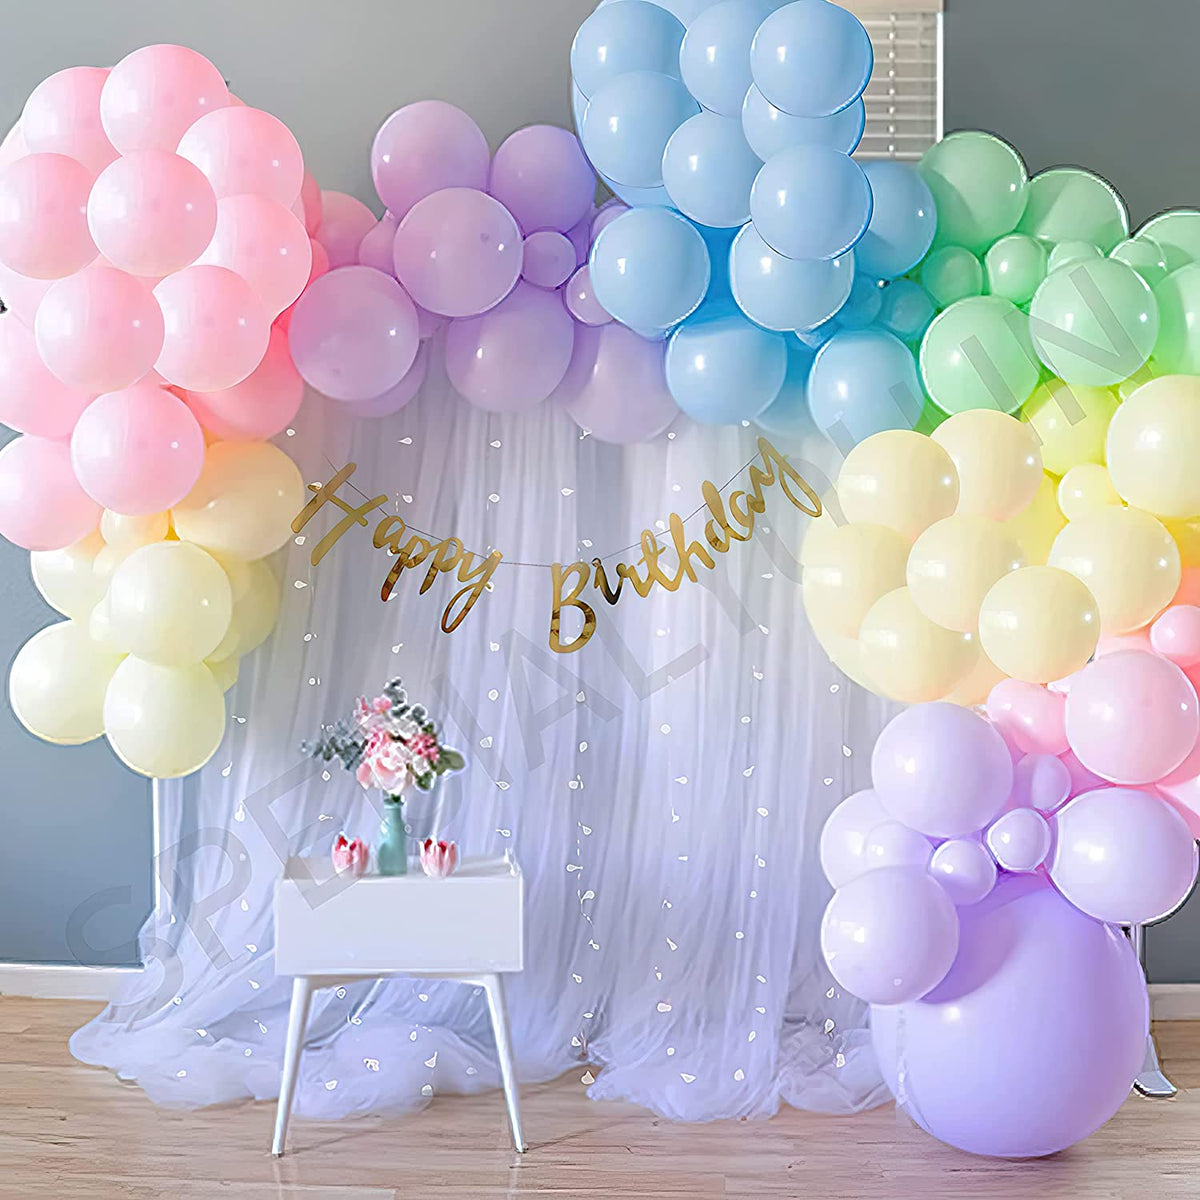 Birthday Decoration Items & DIY Kits for decorating your home